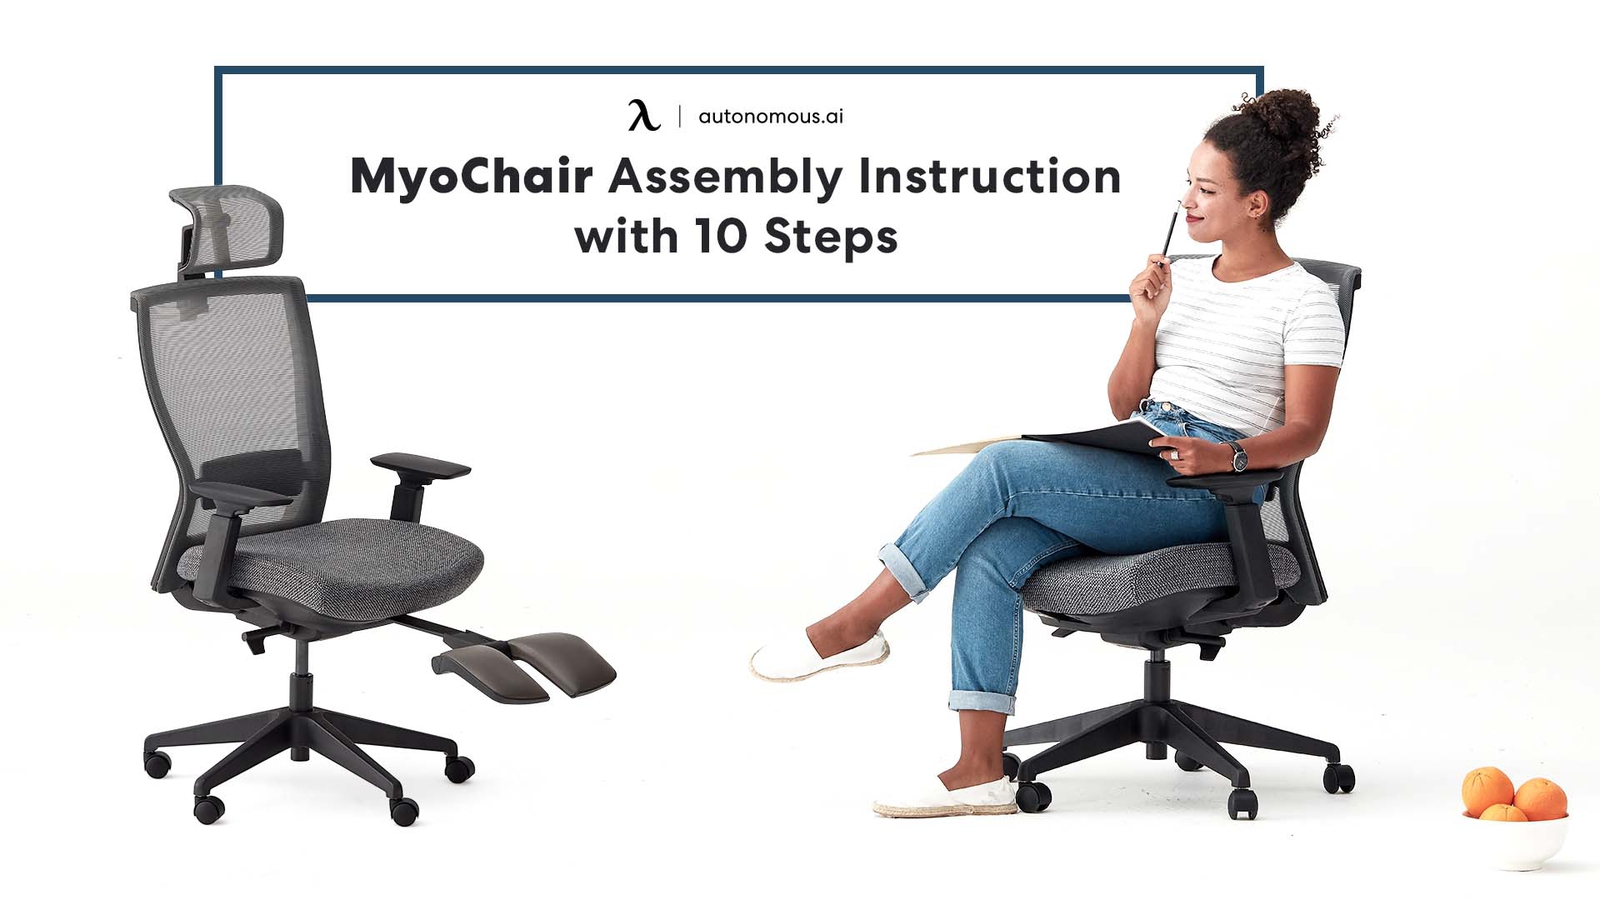 How to Assemble ErgoChair Recline - Assembly Instruction with 10 Steps